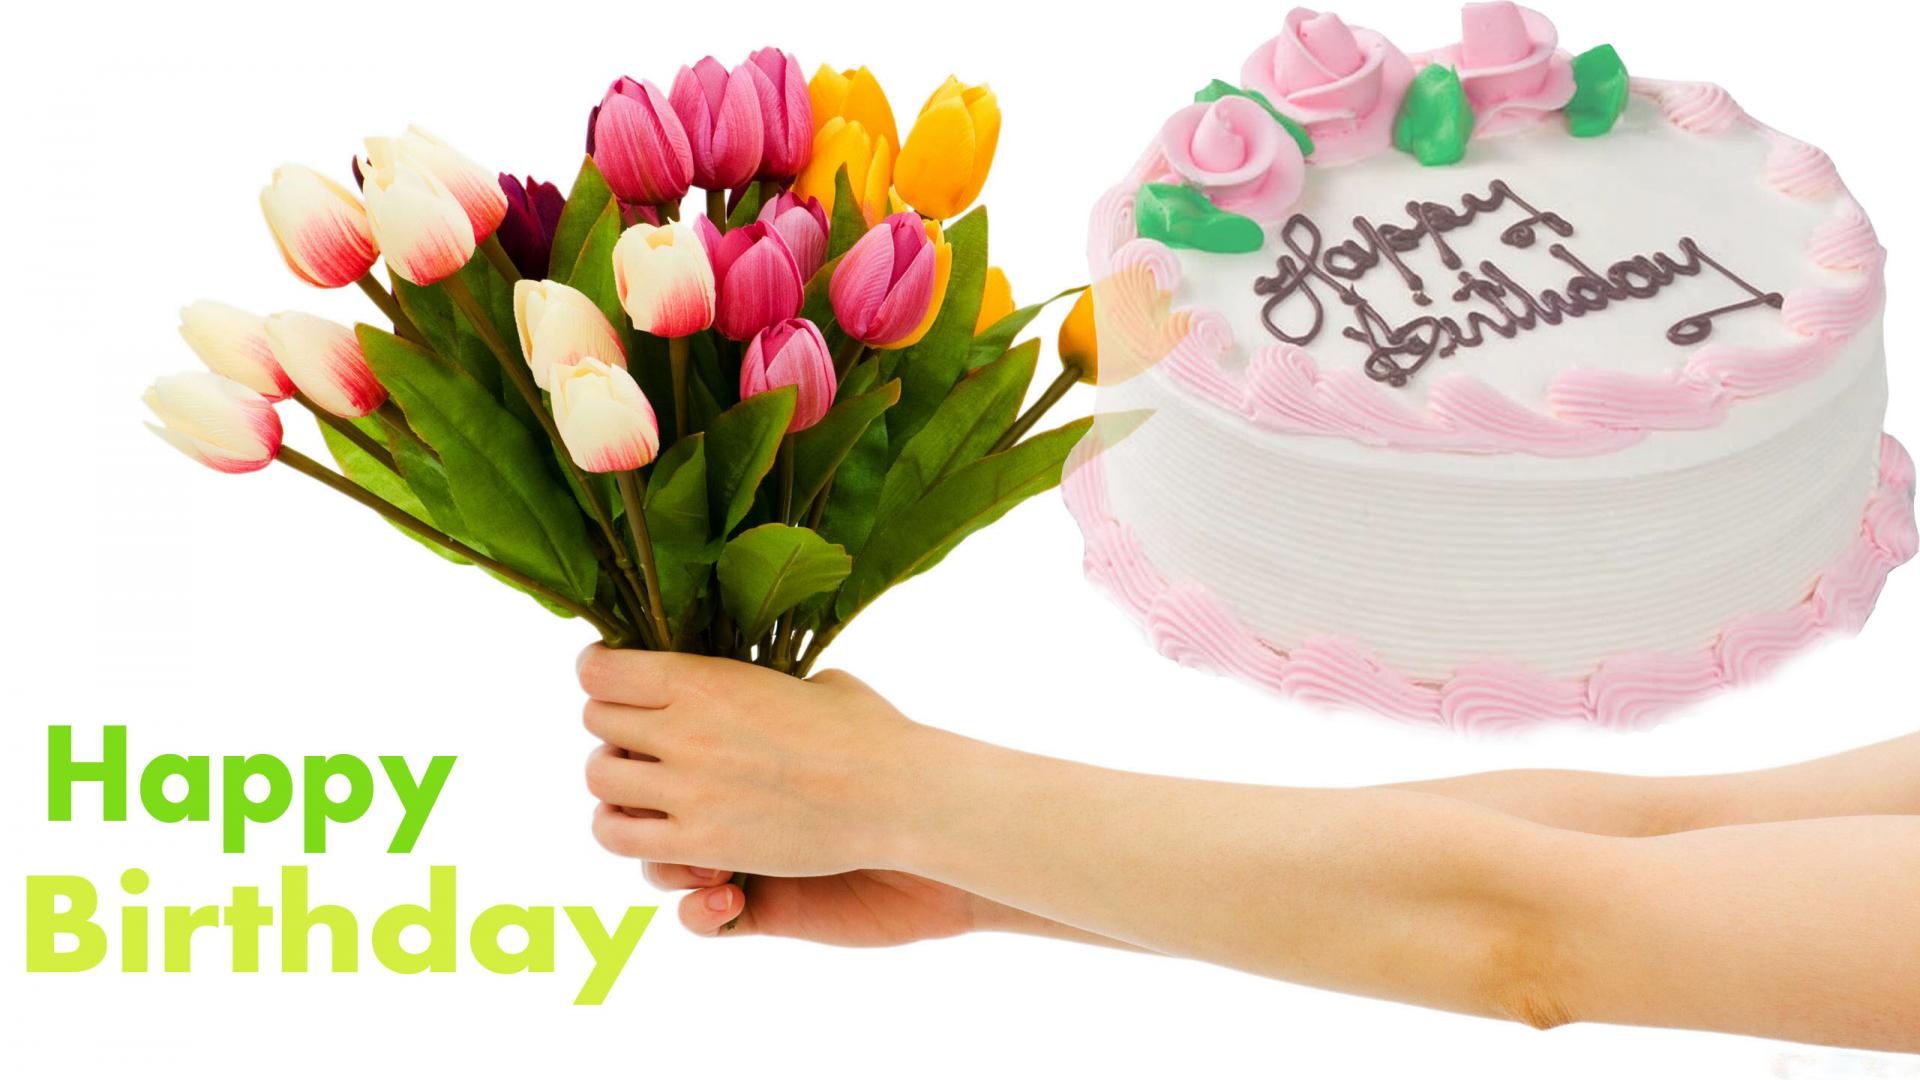 happy birthday cake and flowers wallpaper HD Wallpapers